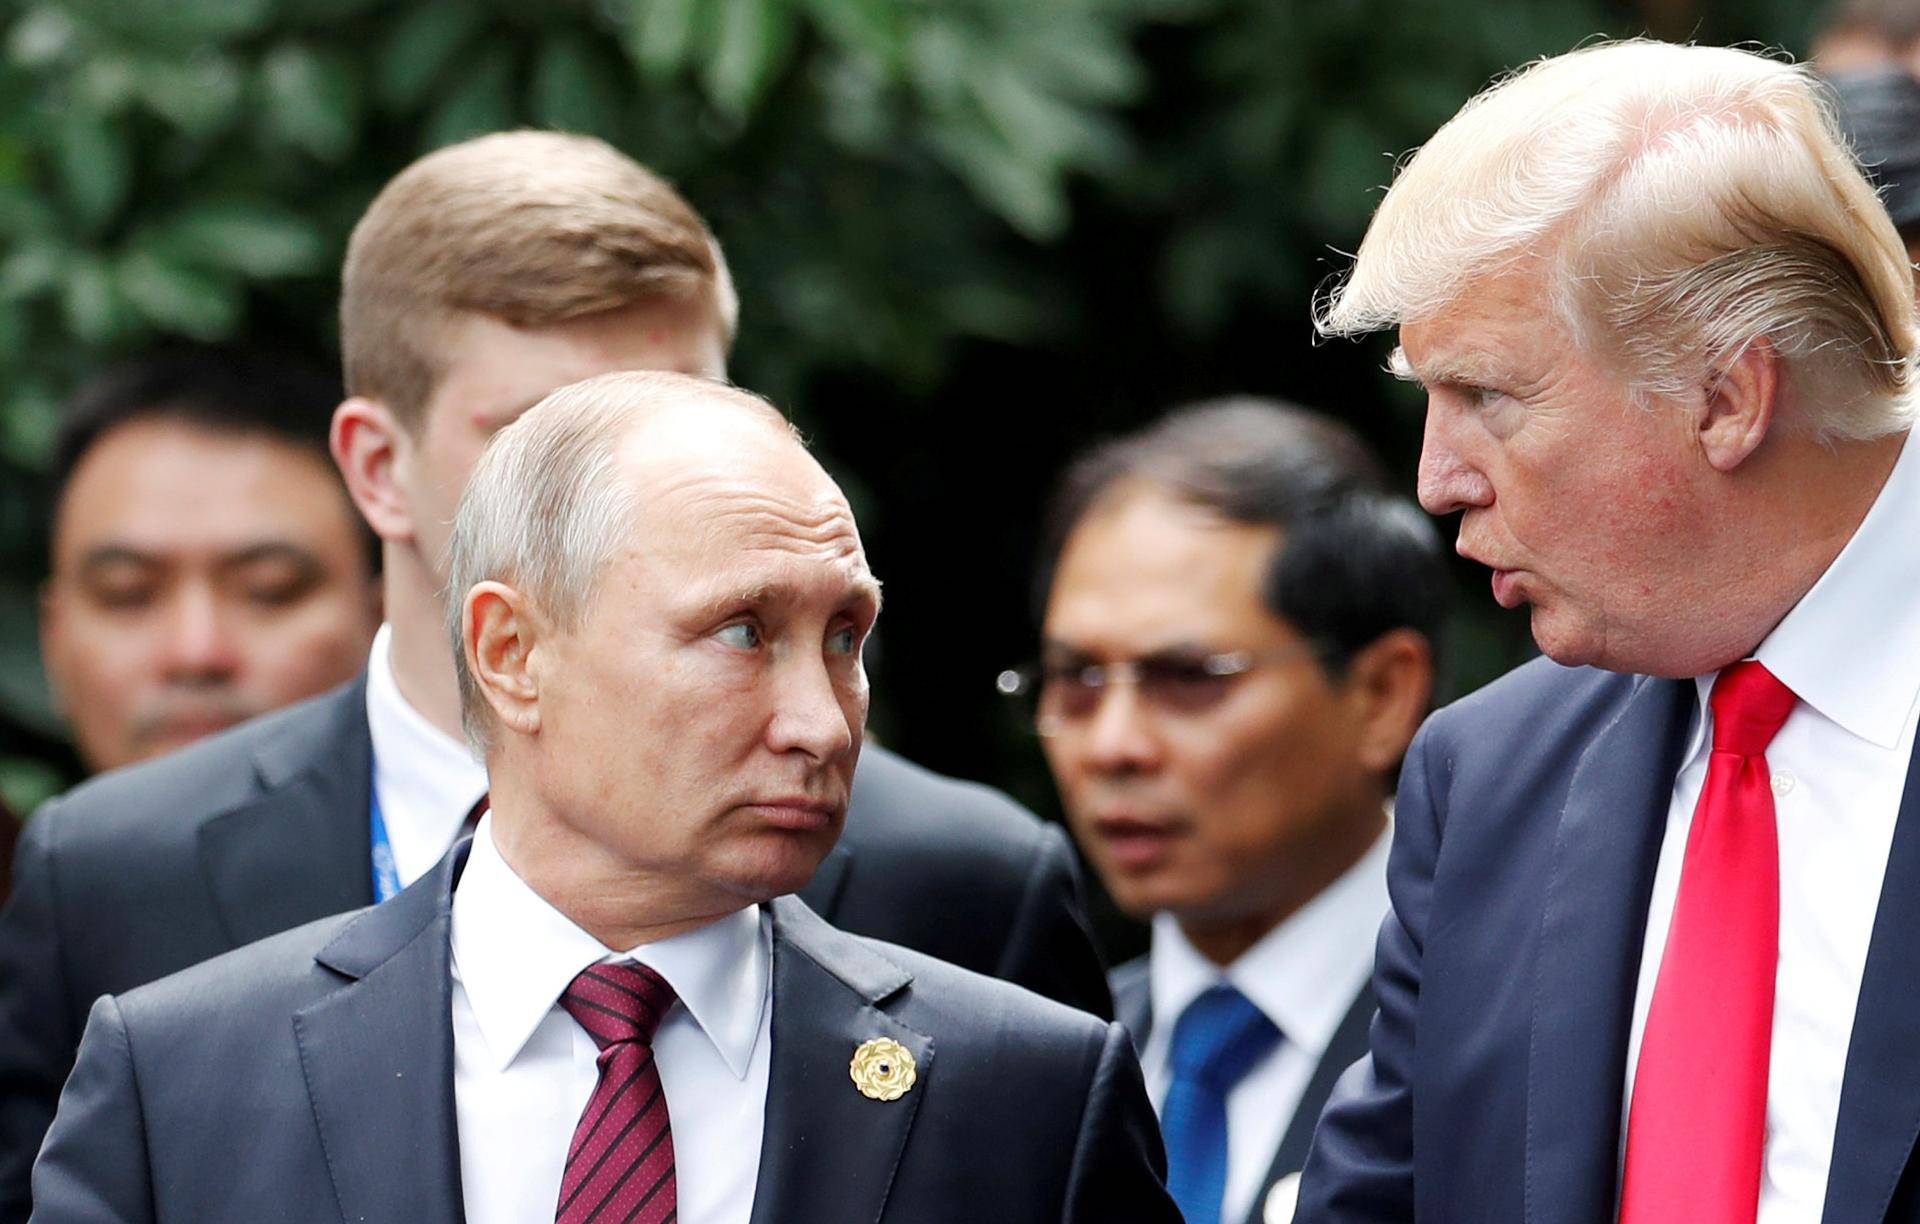 FILE PHOTO: U.S. President Donald Trump and Russia's President Vladimir Putin talk during the family photo session at the APEC Summit in Danang, Vietnam